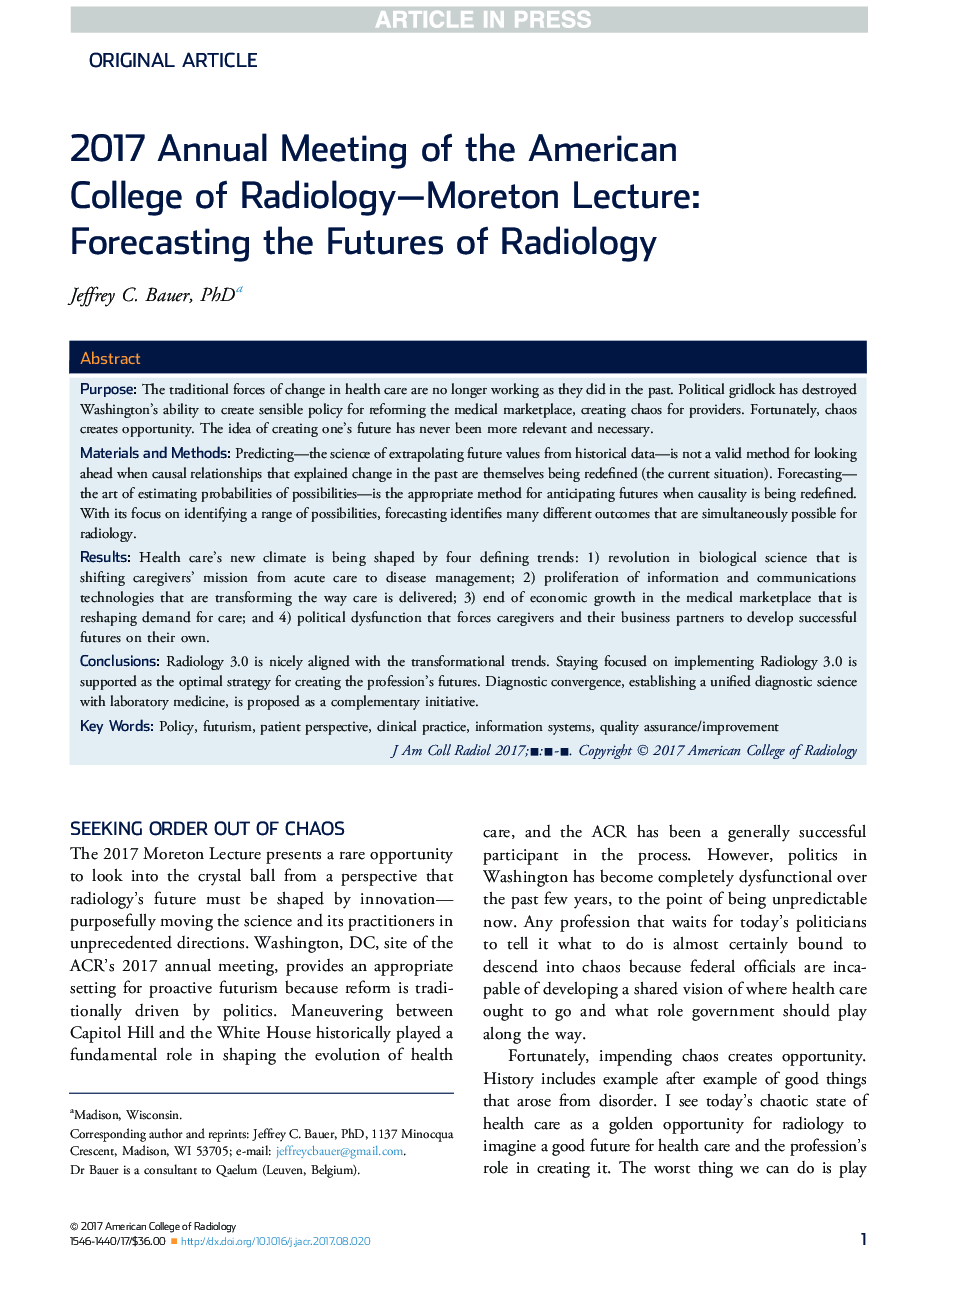 2017 Annual Meeting of the American College of Radiology-Moreton Lecture: Forecasting the Futures of Radiology